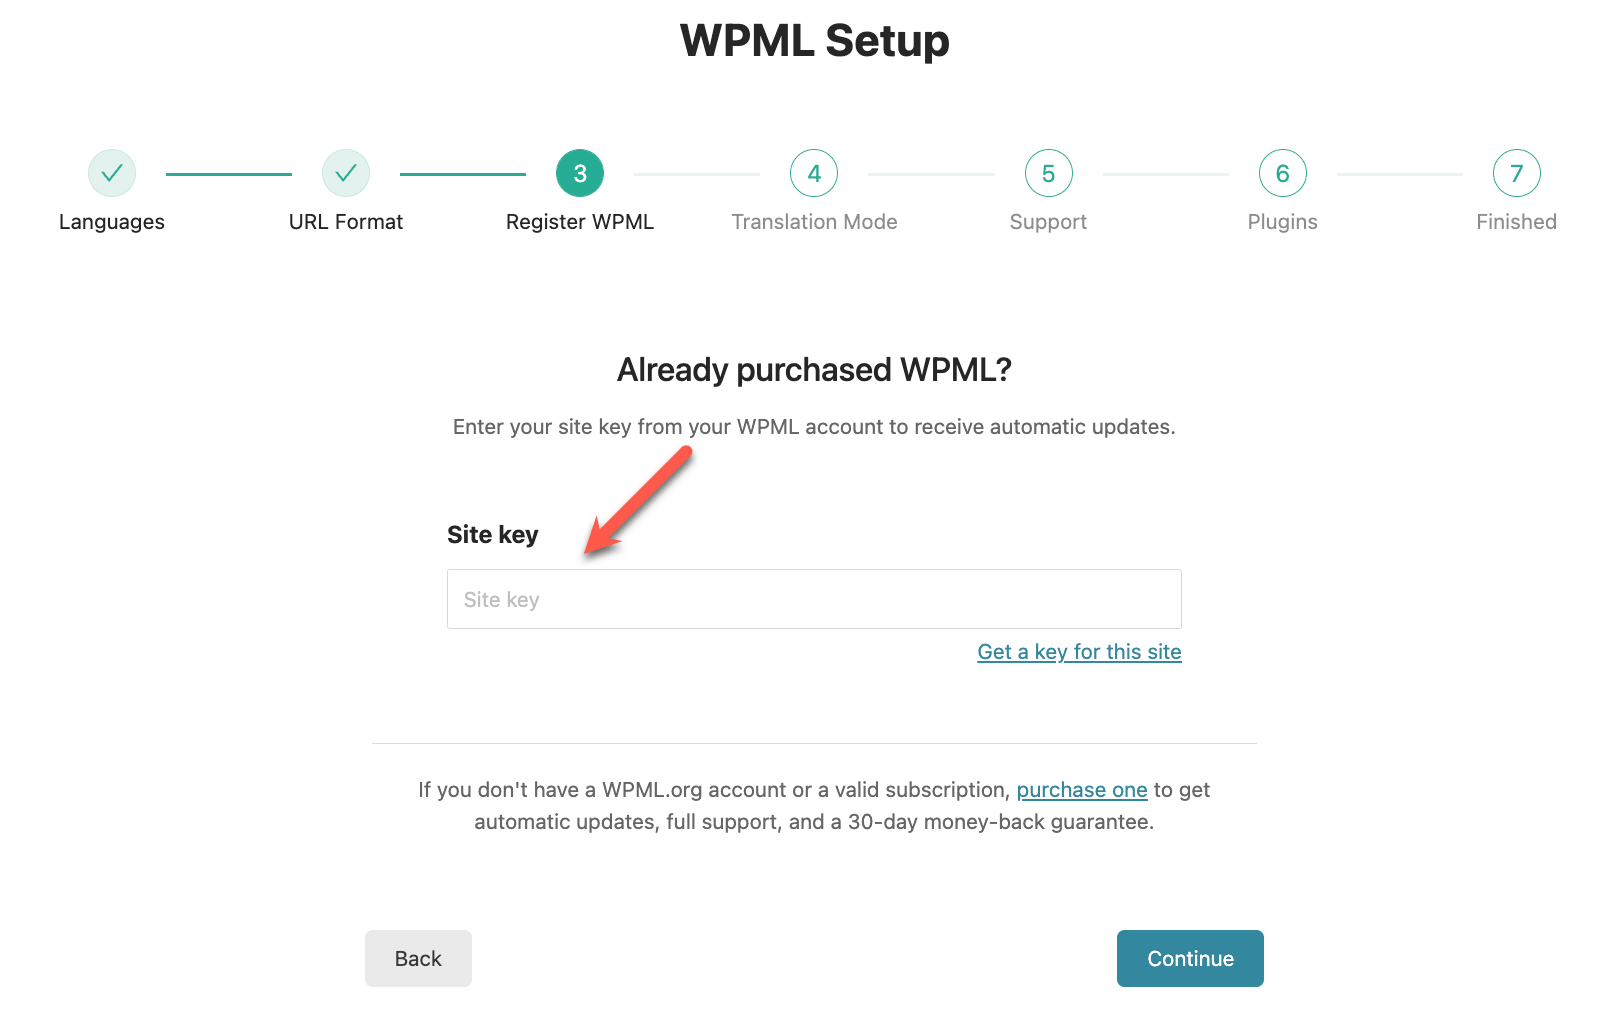 Registering WPML on your site